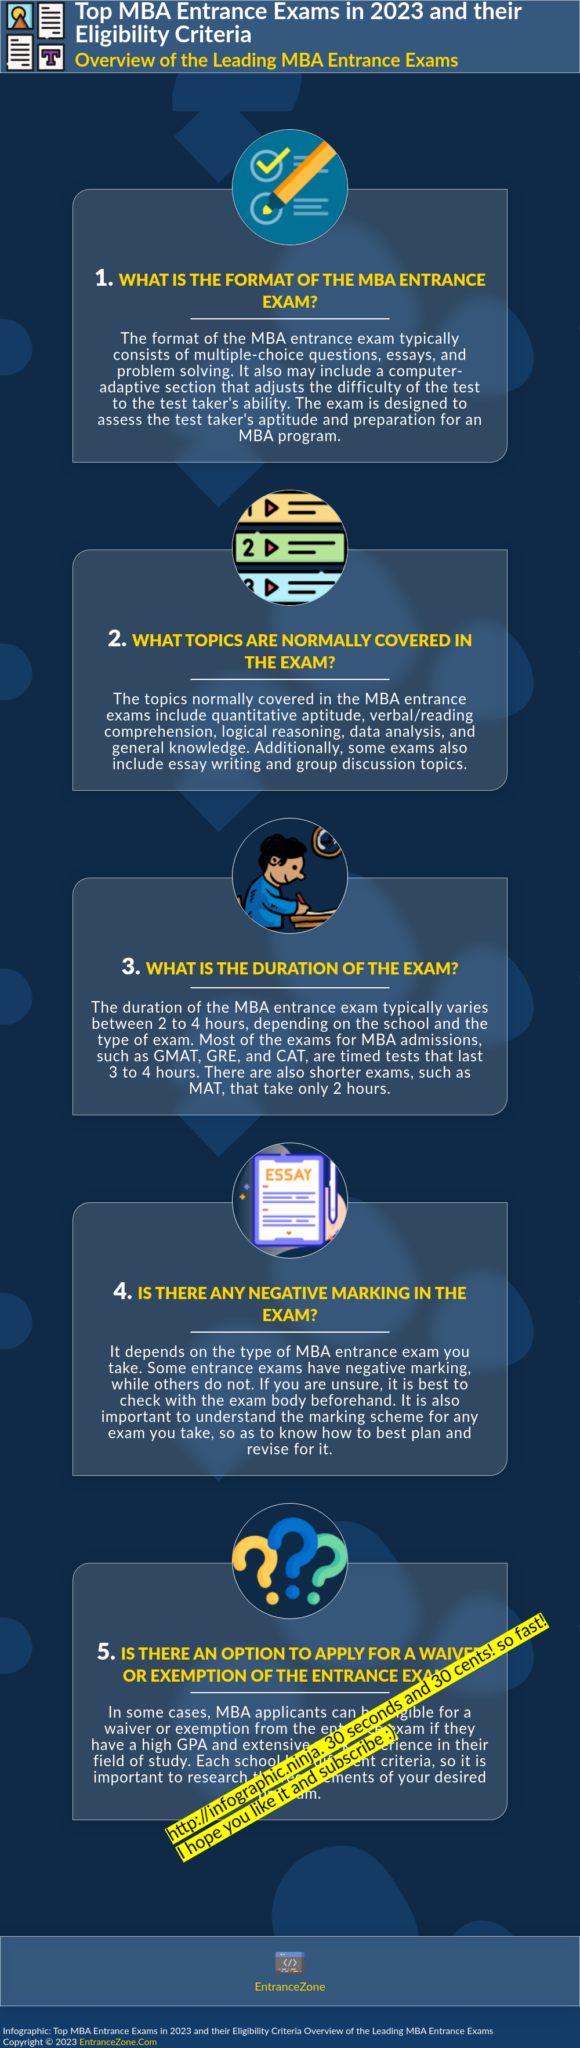 Infographic - Top MBA Entrance Exams in 2023 and their Eligibility Criteria Overview of the Leading MBA Entrance Exams